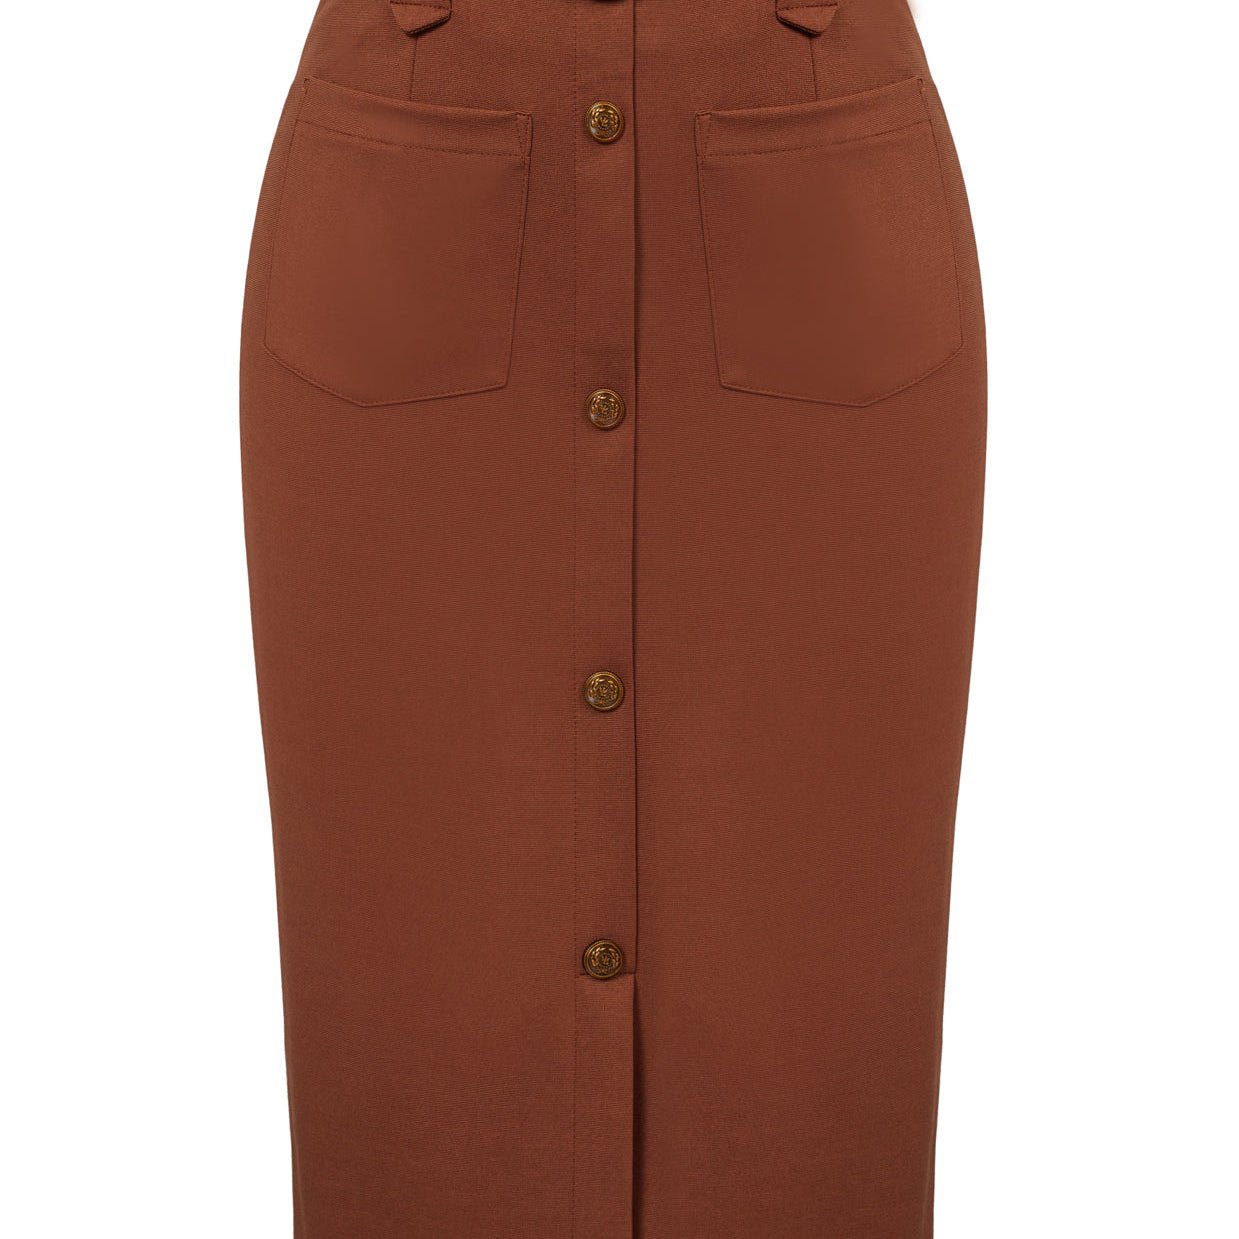 Pencil Skirt Knee Length High Waisted 1950s Vintage Office Work Bodycon Skirt with Pockets